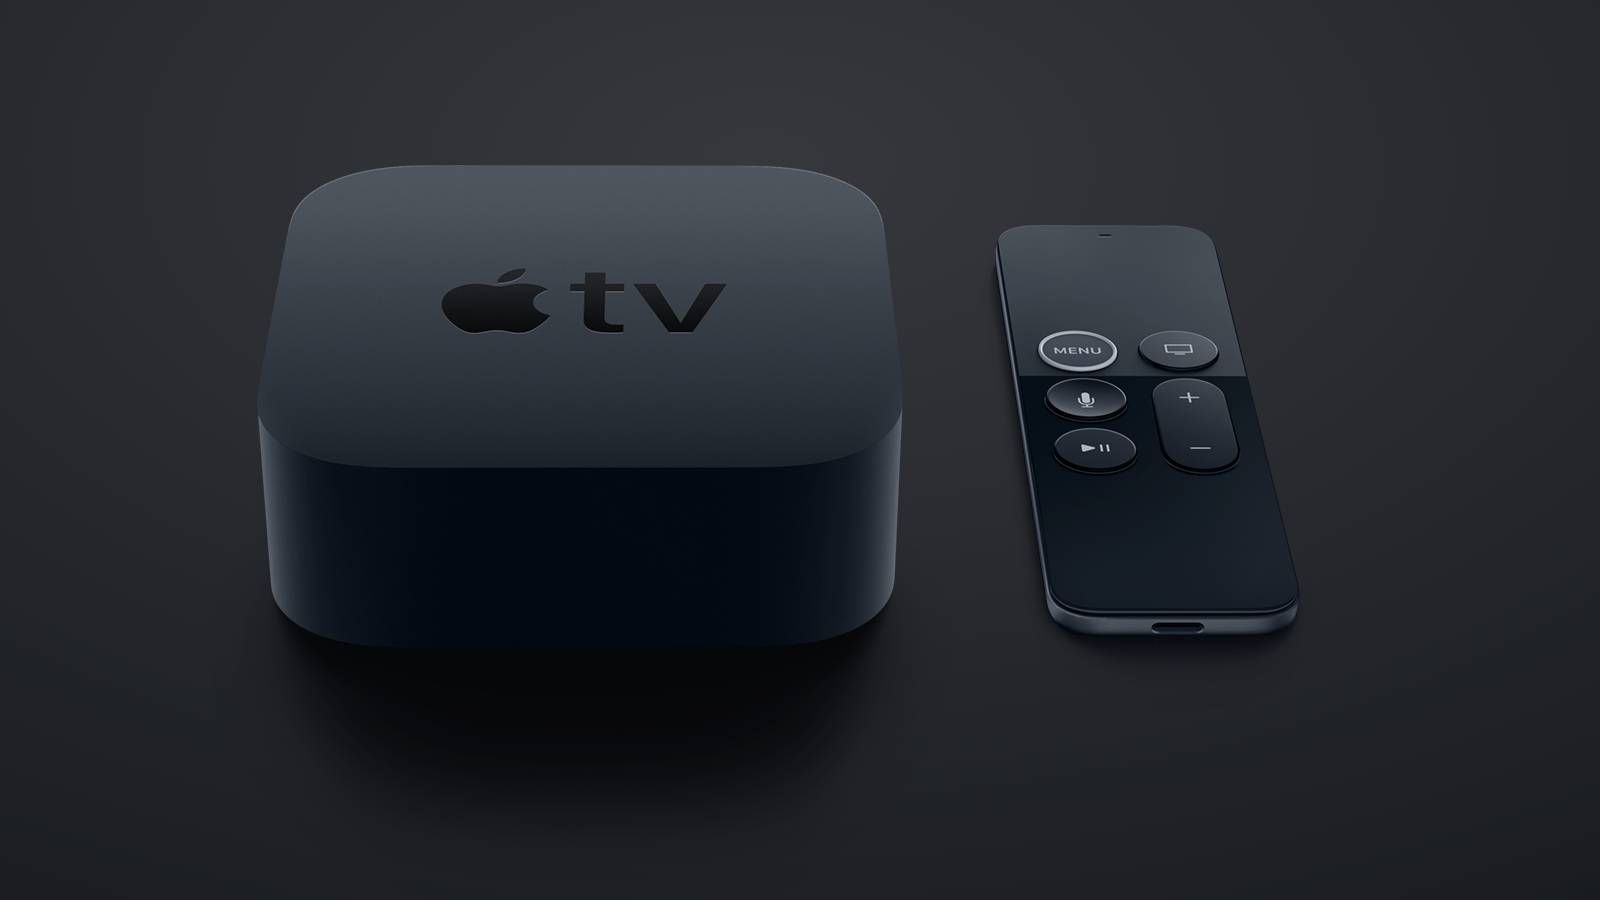 Apple removes “Siri Remote” from tvOS 14.5 Beta, renames “Home” button